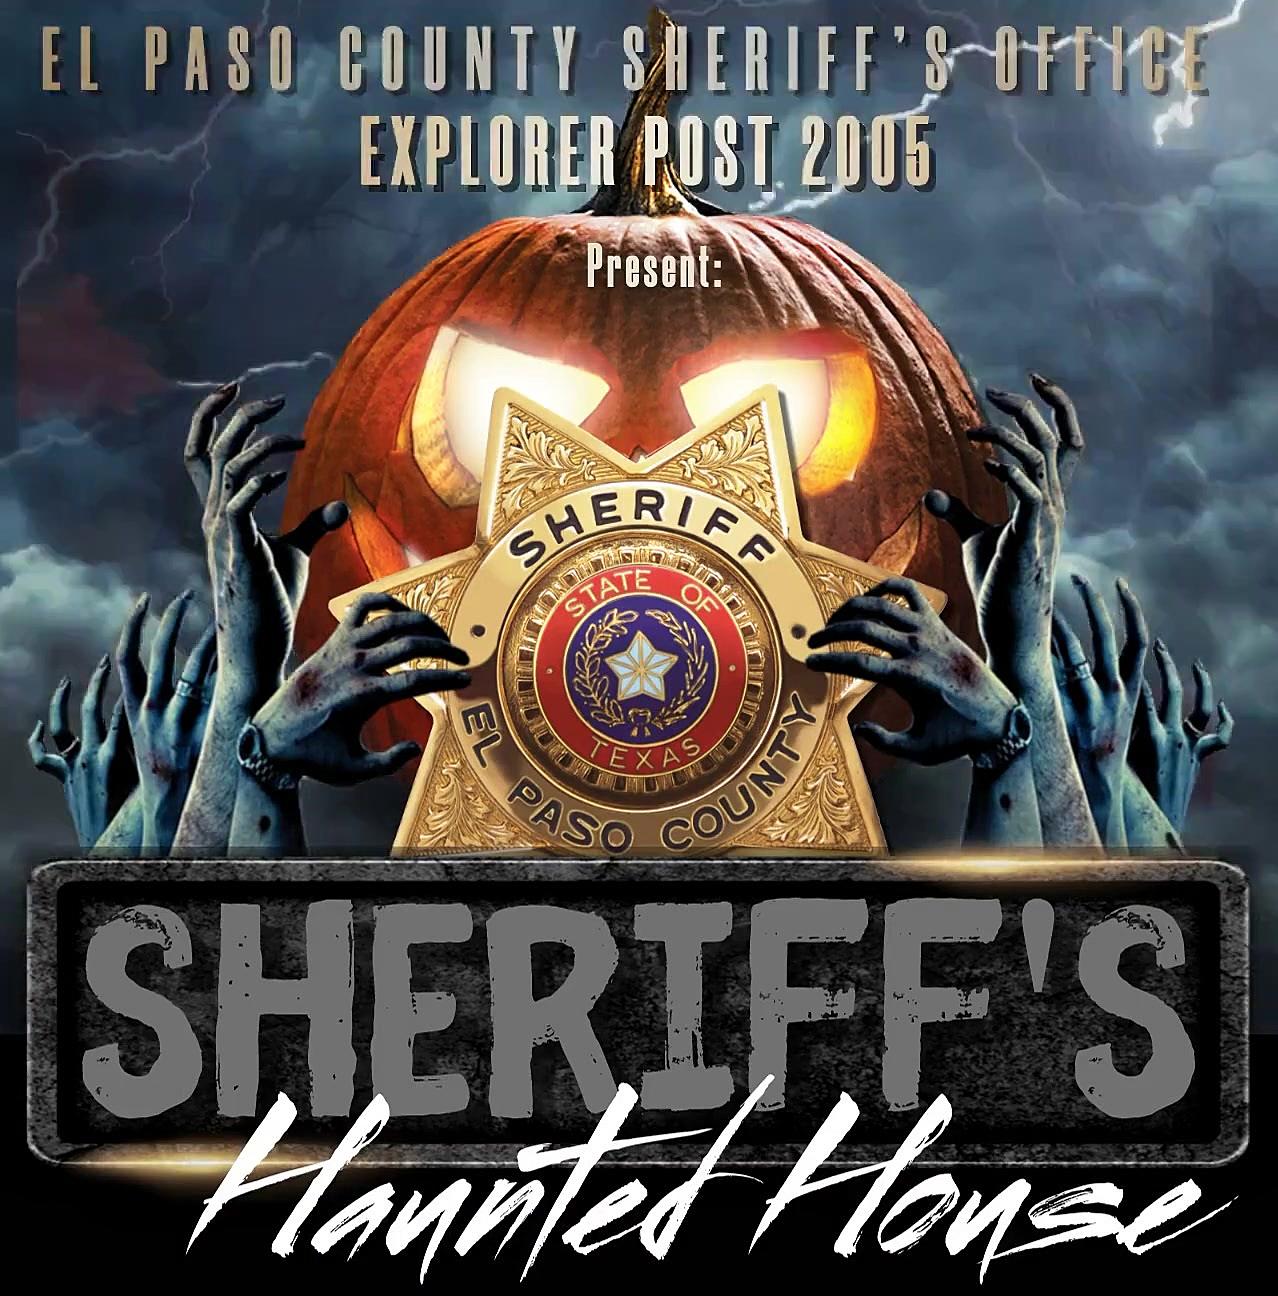 El Paso County Sheriff’s Haunted House